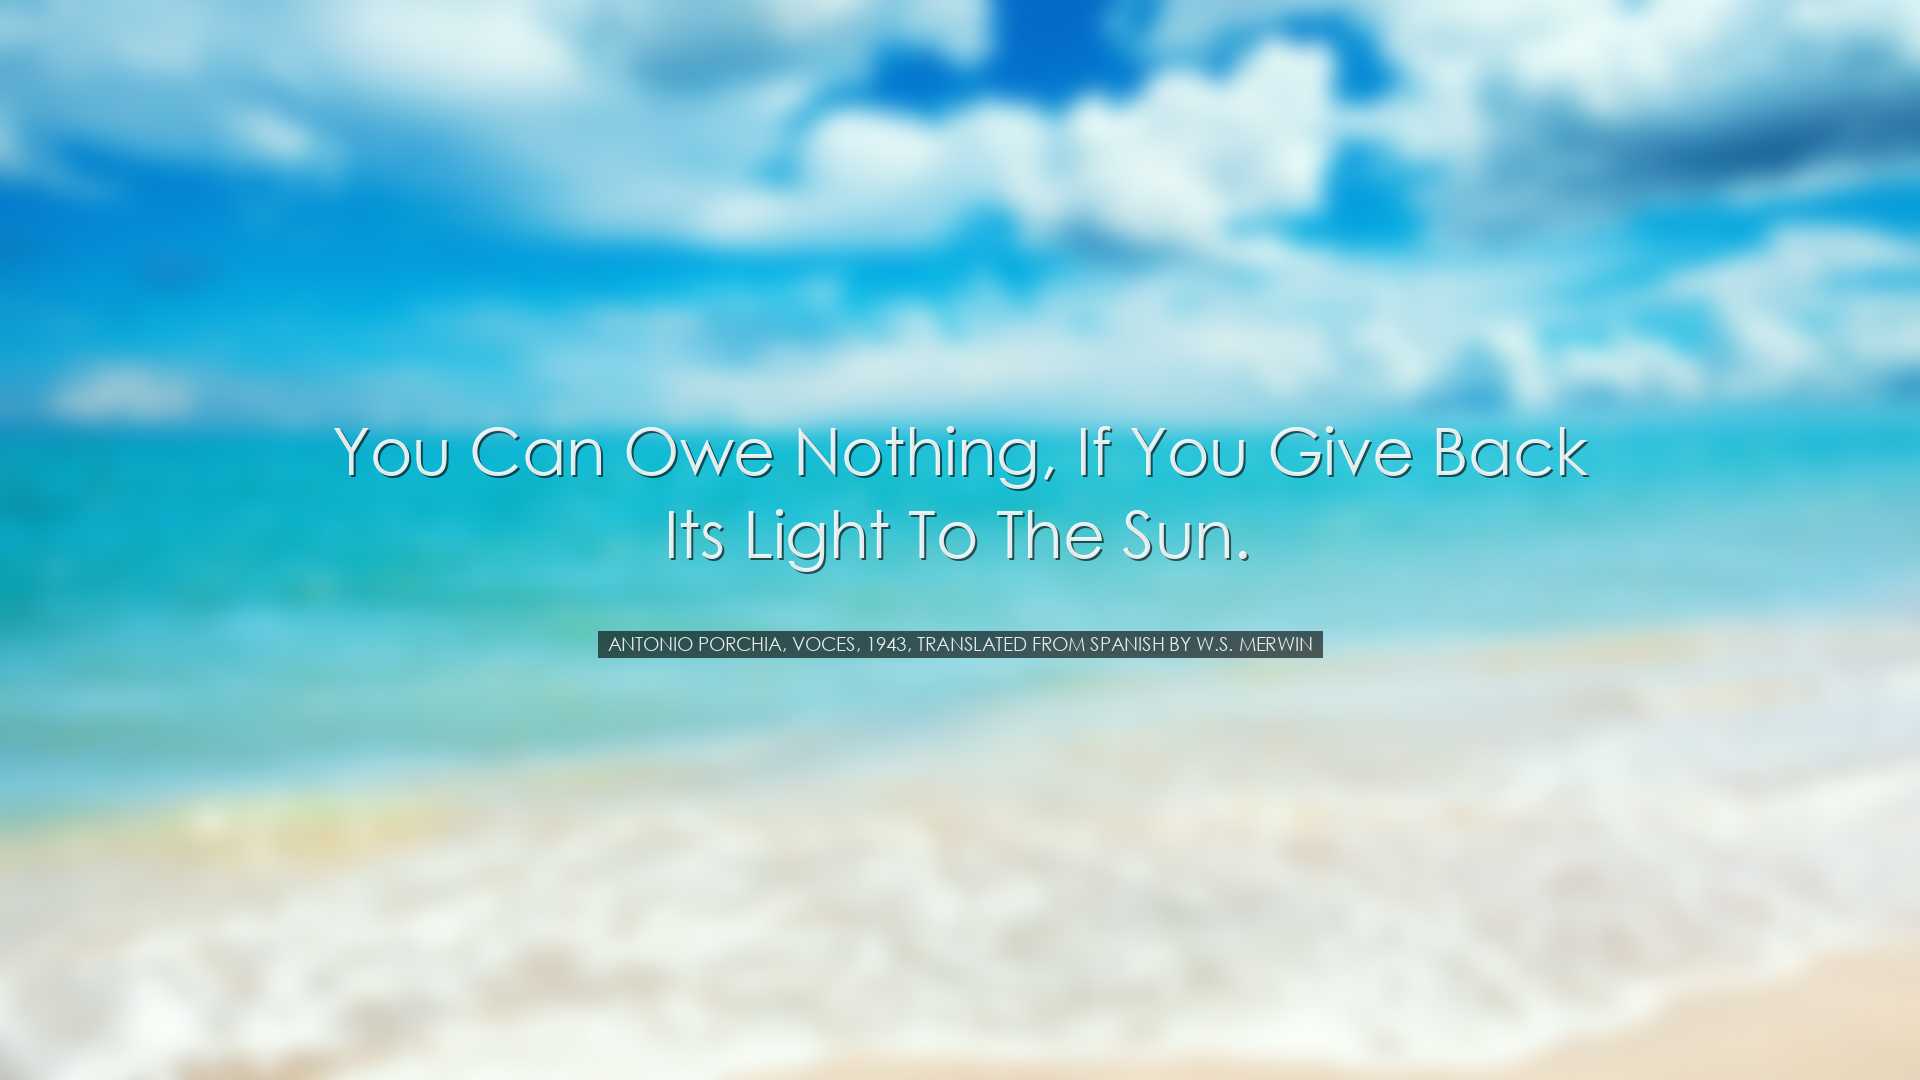 You can owe nothing, if you give back its light to the sun. - Anto